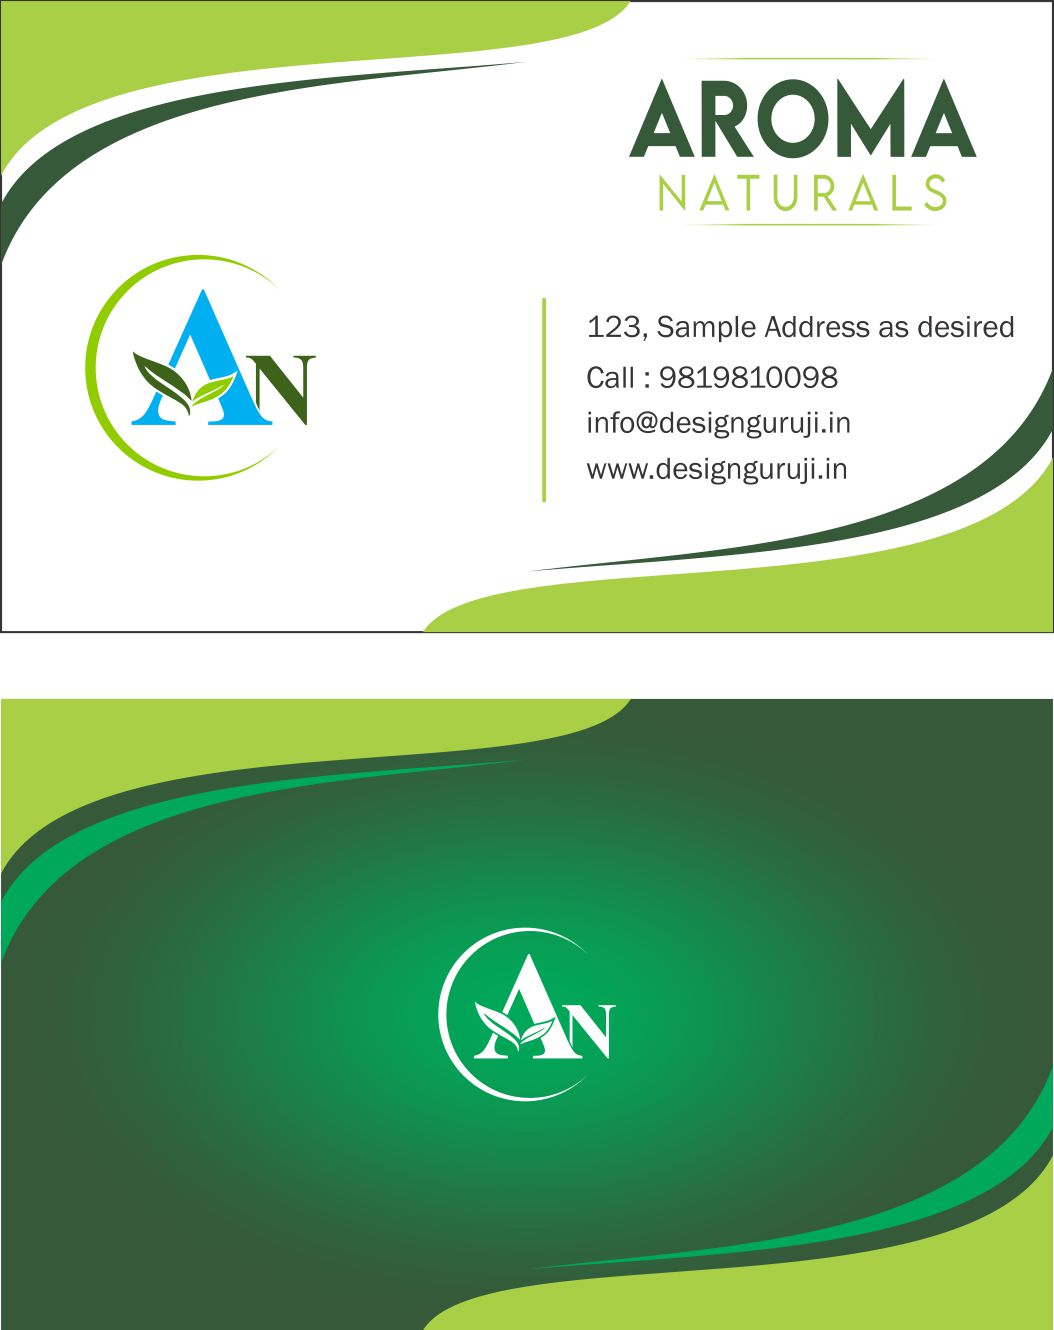 How To Design A Visiting Card In Coreldraw Pdf